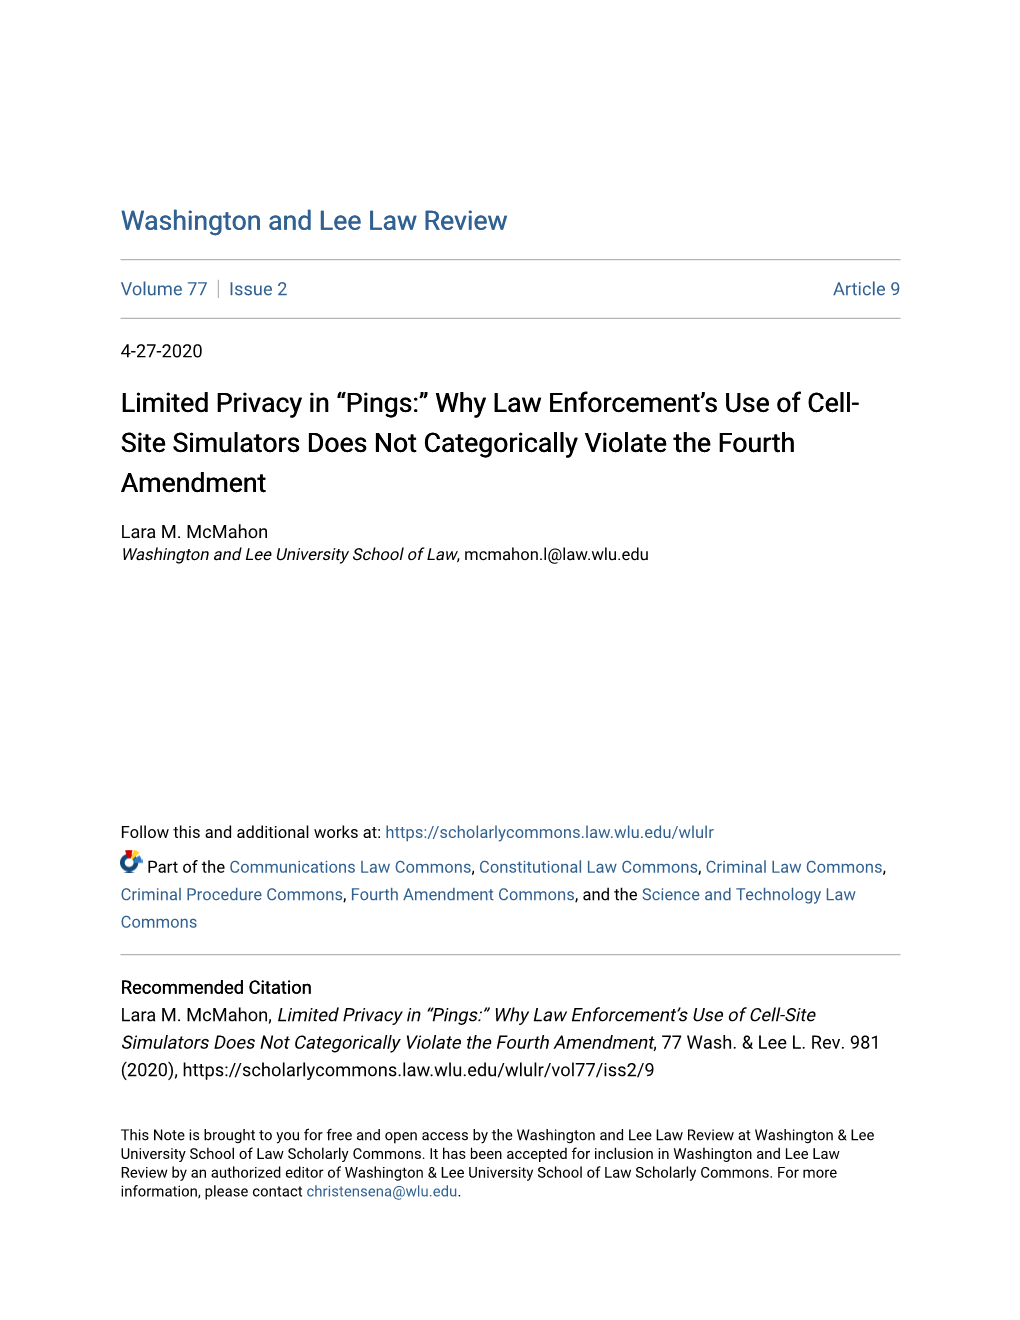 Limited Privacy in “Pings:” Why Law Enforcement's Use of Cell-Site